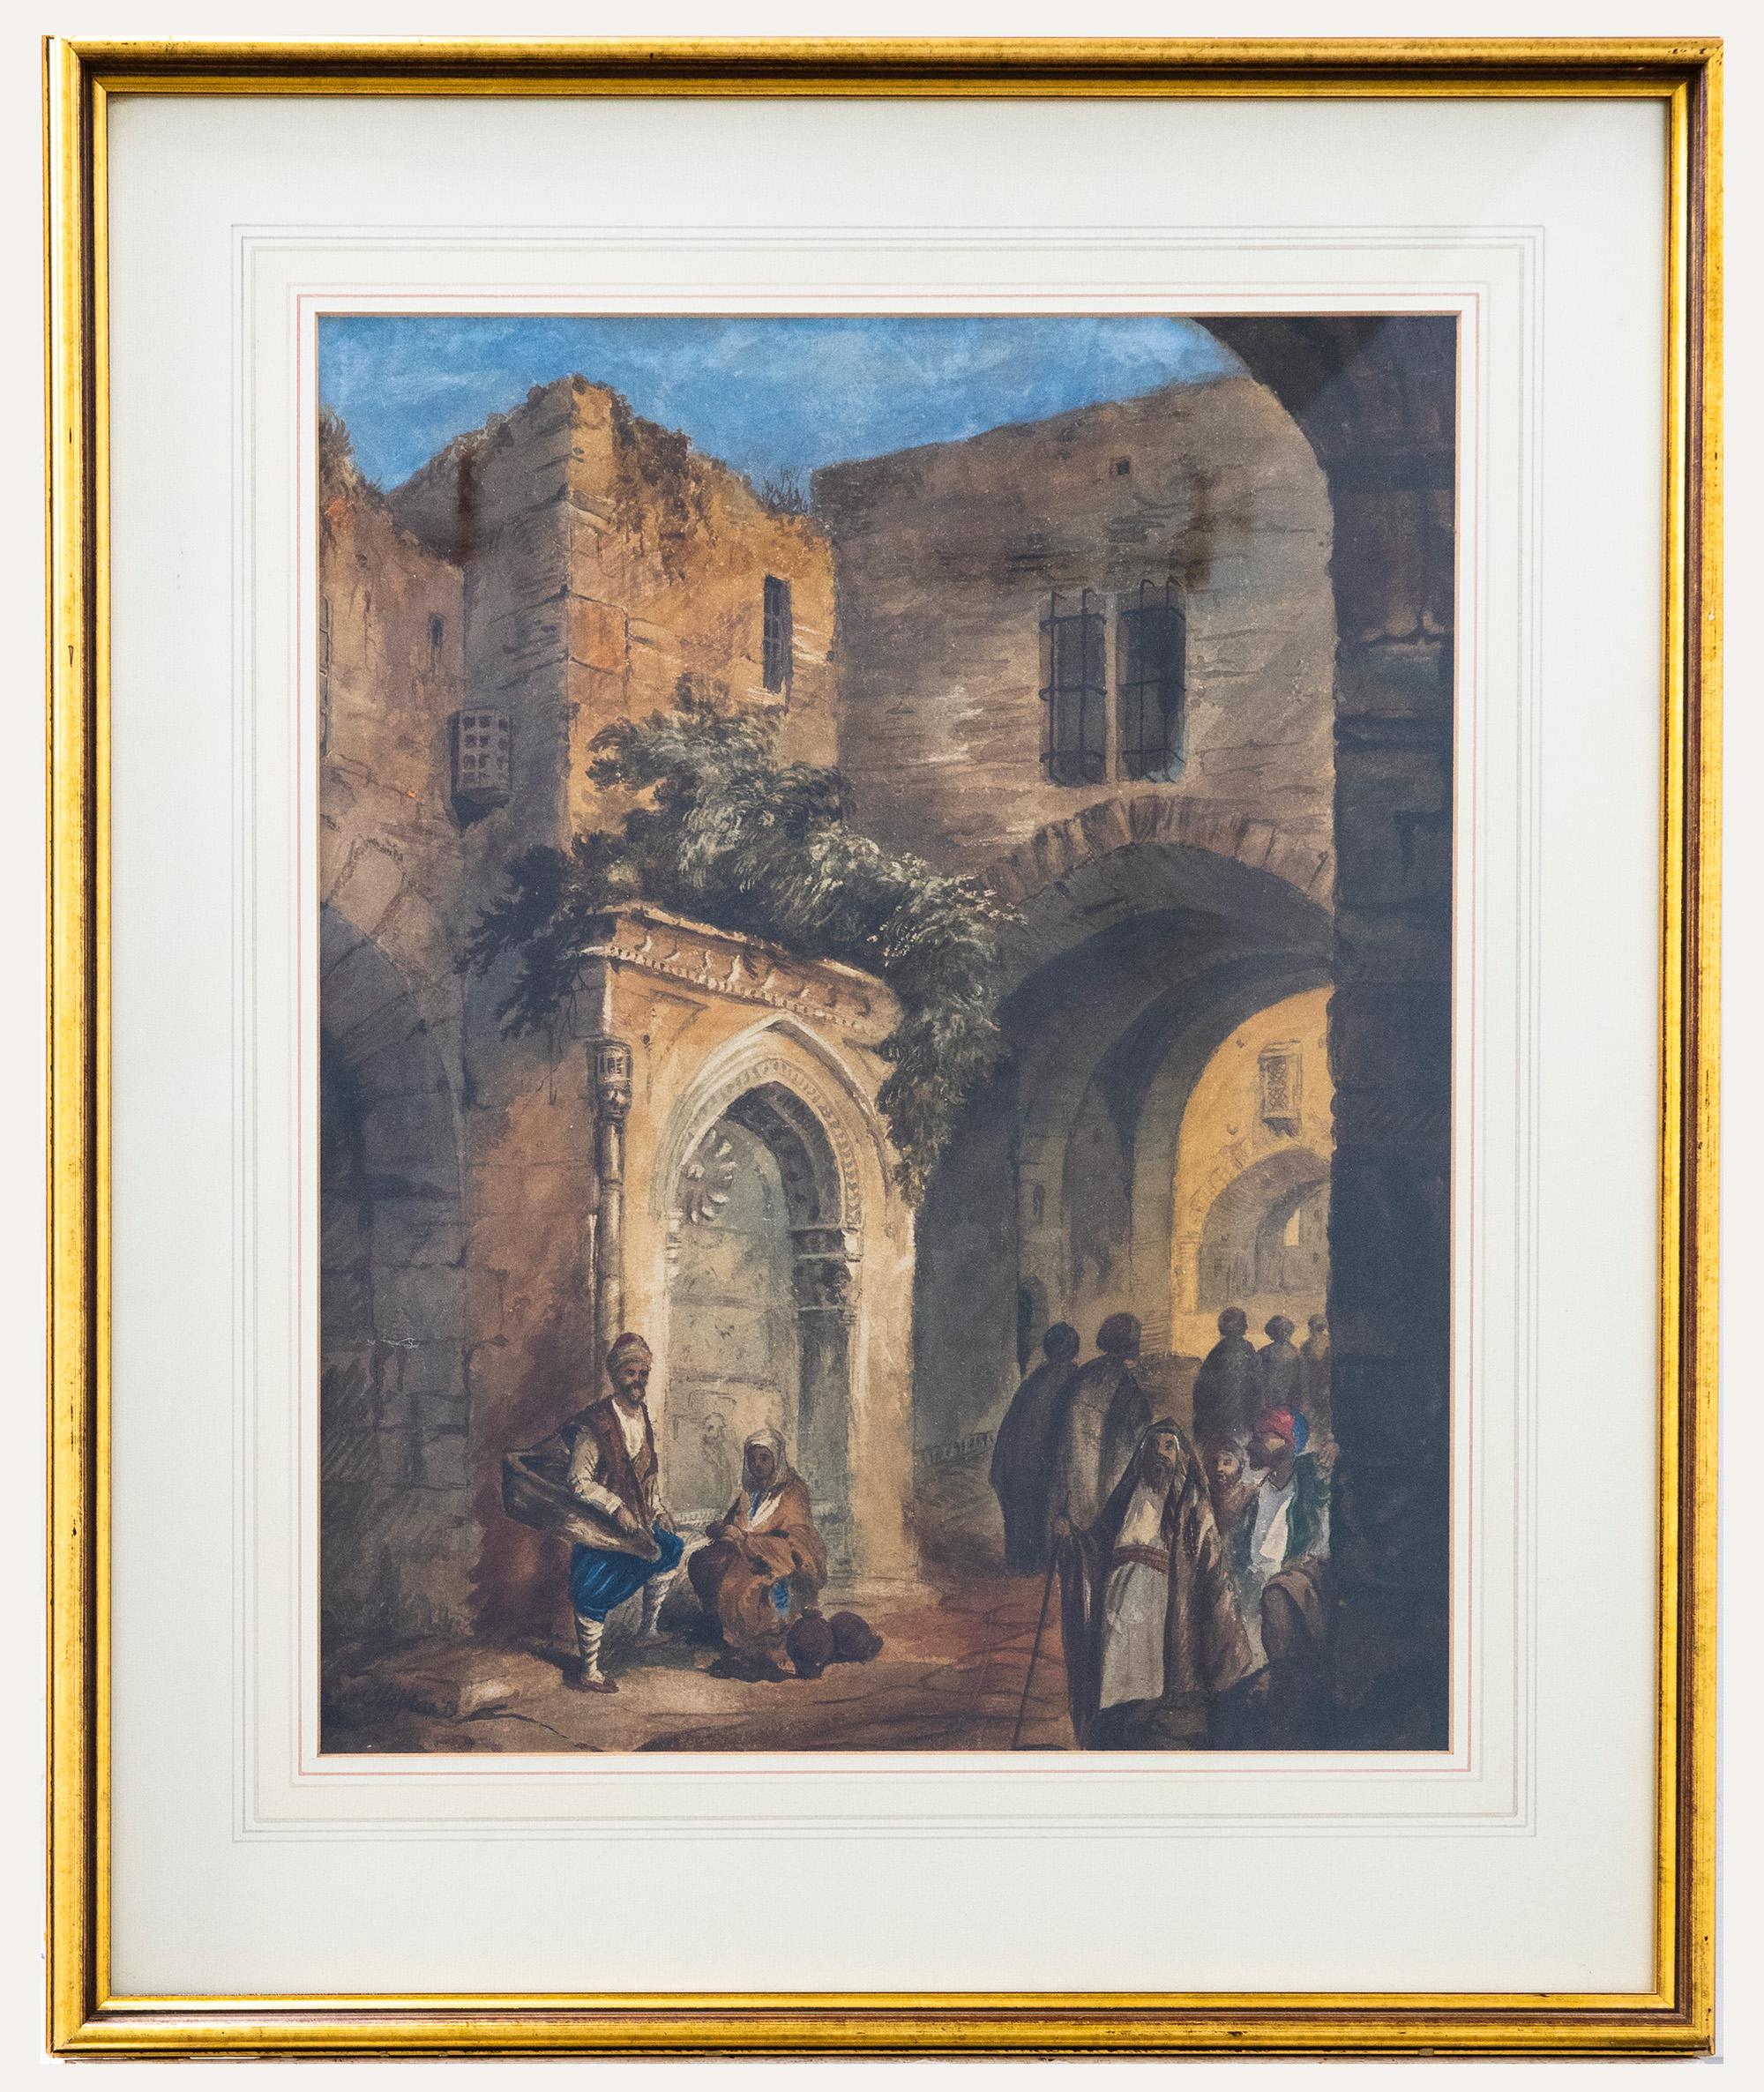 This 19th century watercolour depicts a busy middle eastern street with figures walking in the town's ancient quarter. The watercolour has been signed and dated to the lower left. Well-presented in a fine wash-line mount and 20th century gilt frame.